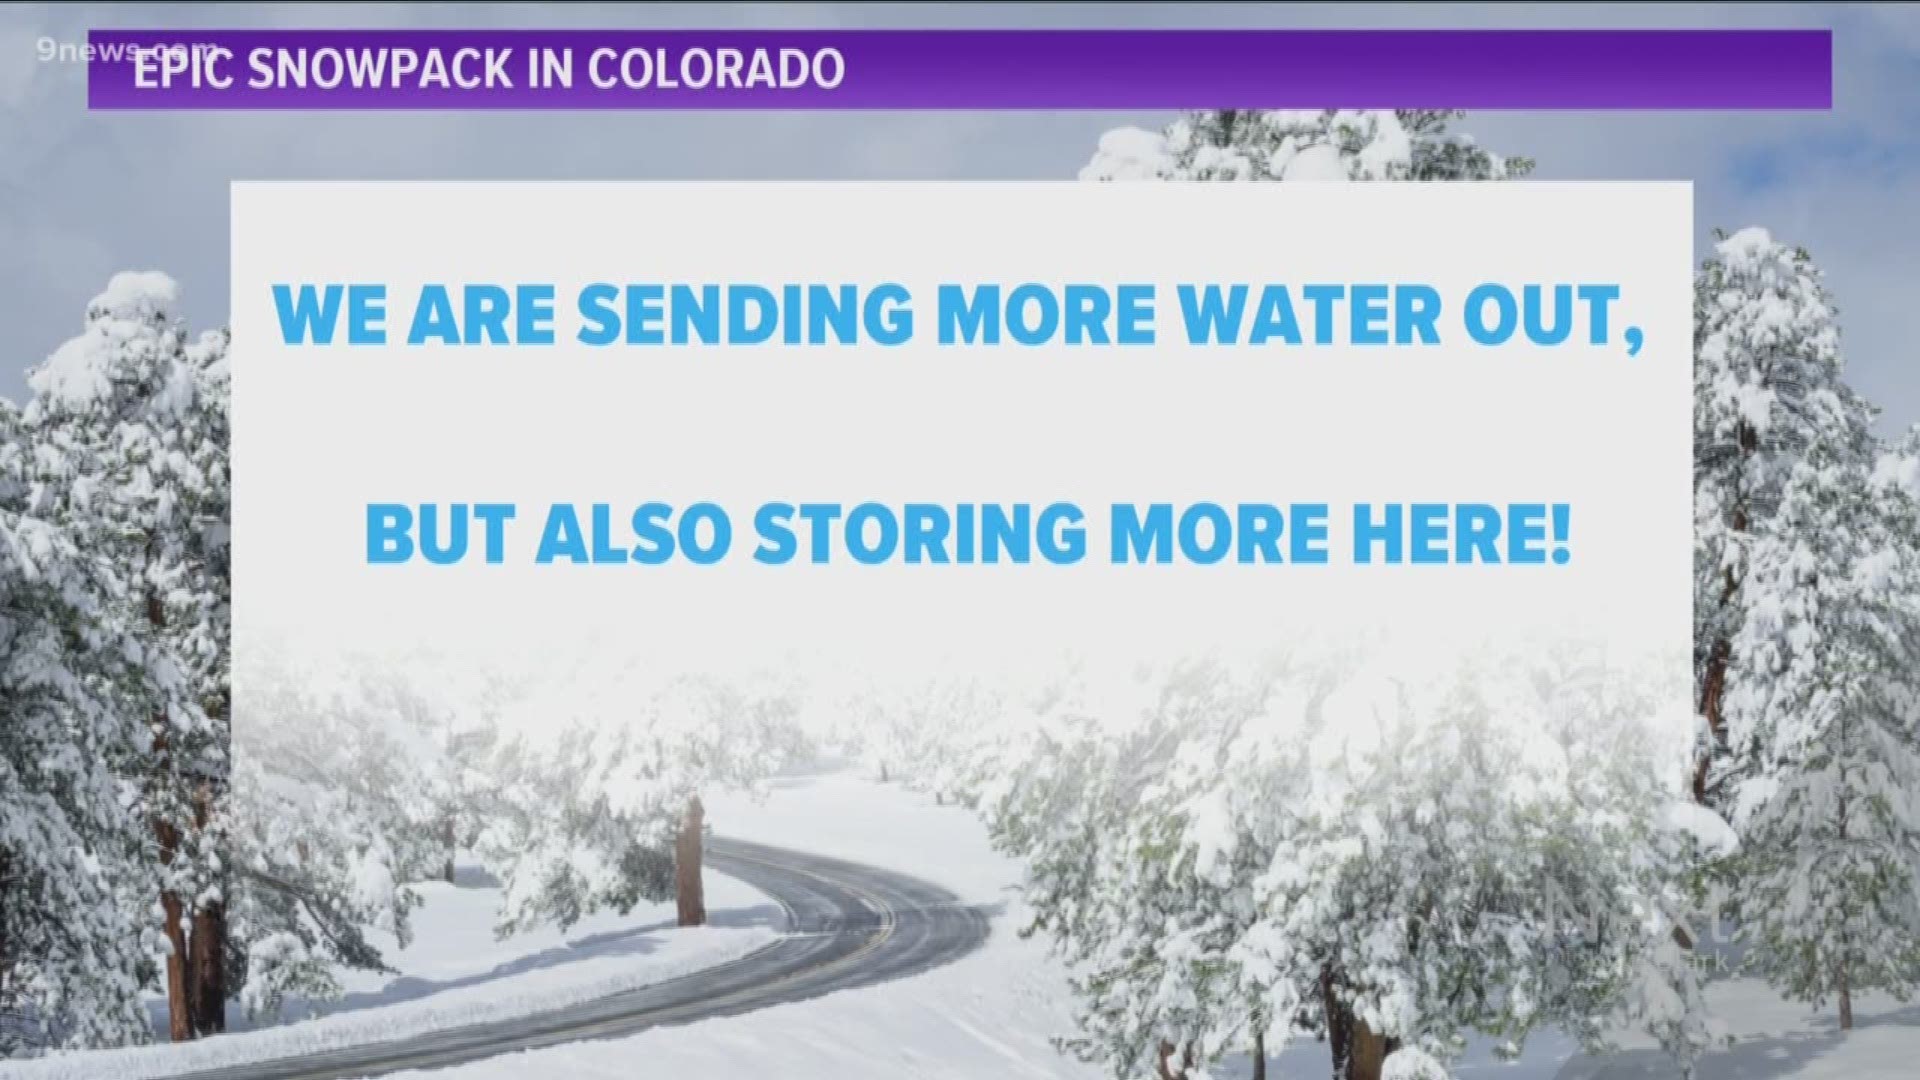 We've talked about Colorado's impressive snowpack this year, but do we have enough space in our reservoirs to store all the water, or would it flow to our neighboring states? Meteorologist Danielle Grant gives us an answer.